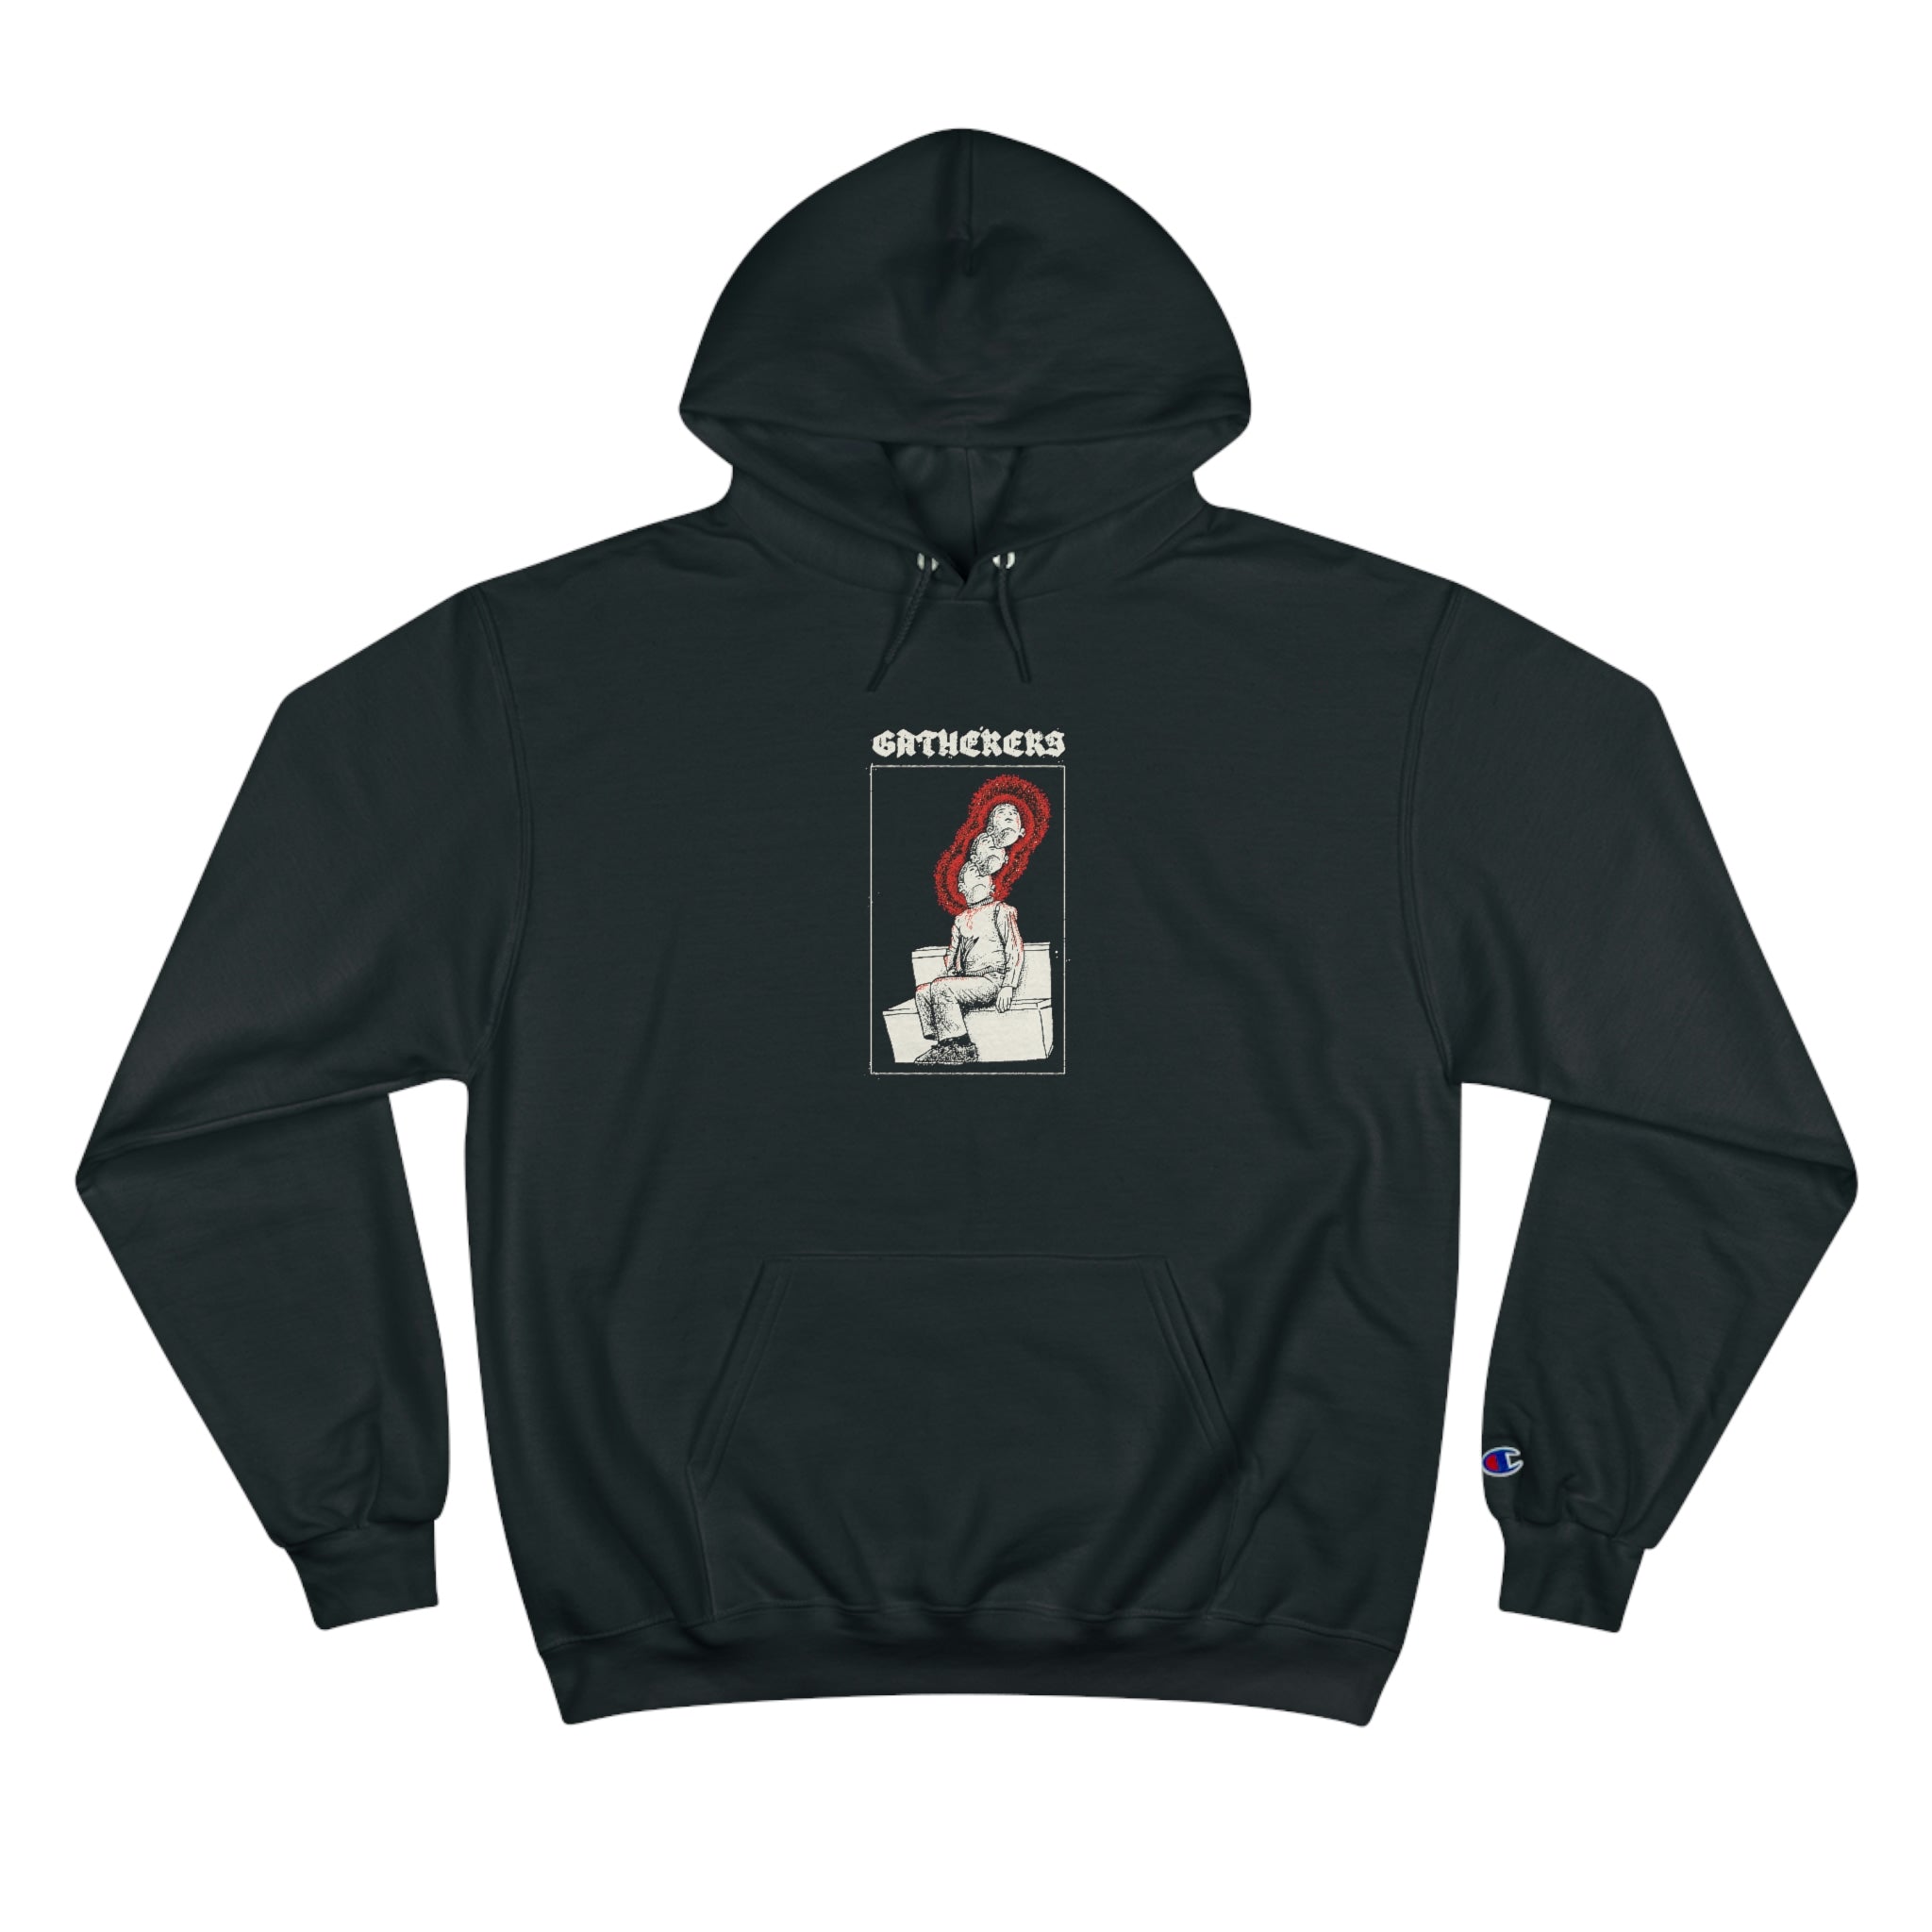 staircase pullover hoodie - NO SLEEP RECORDS - Gatherers